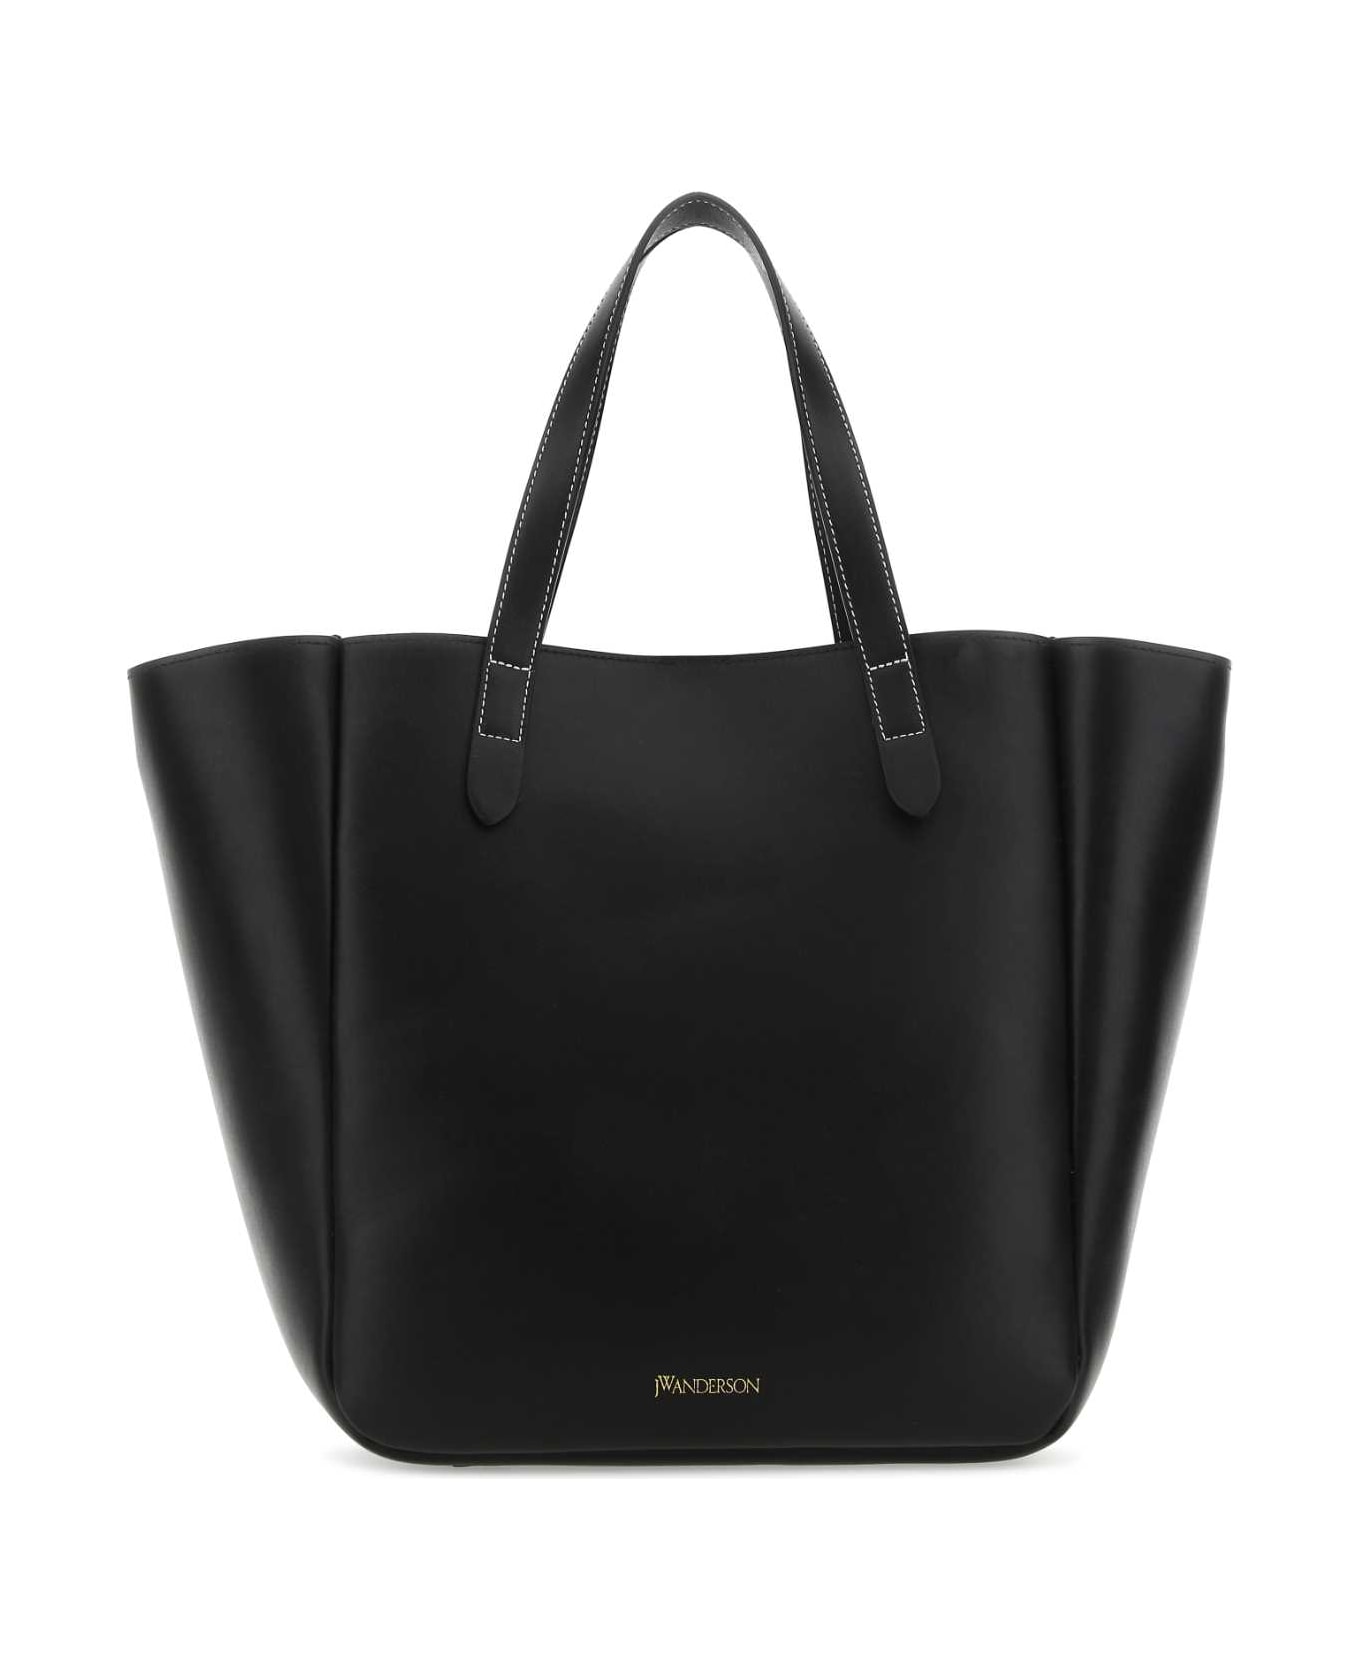 J.W. Anderson Black Leather Shopping Bag - 999